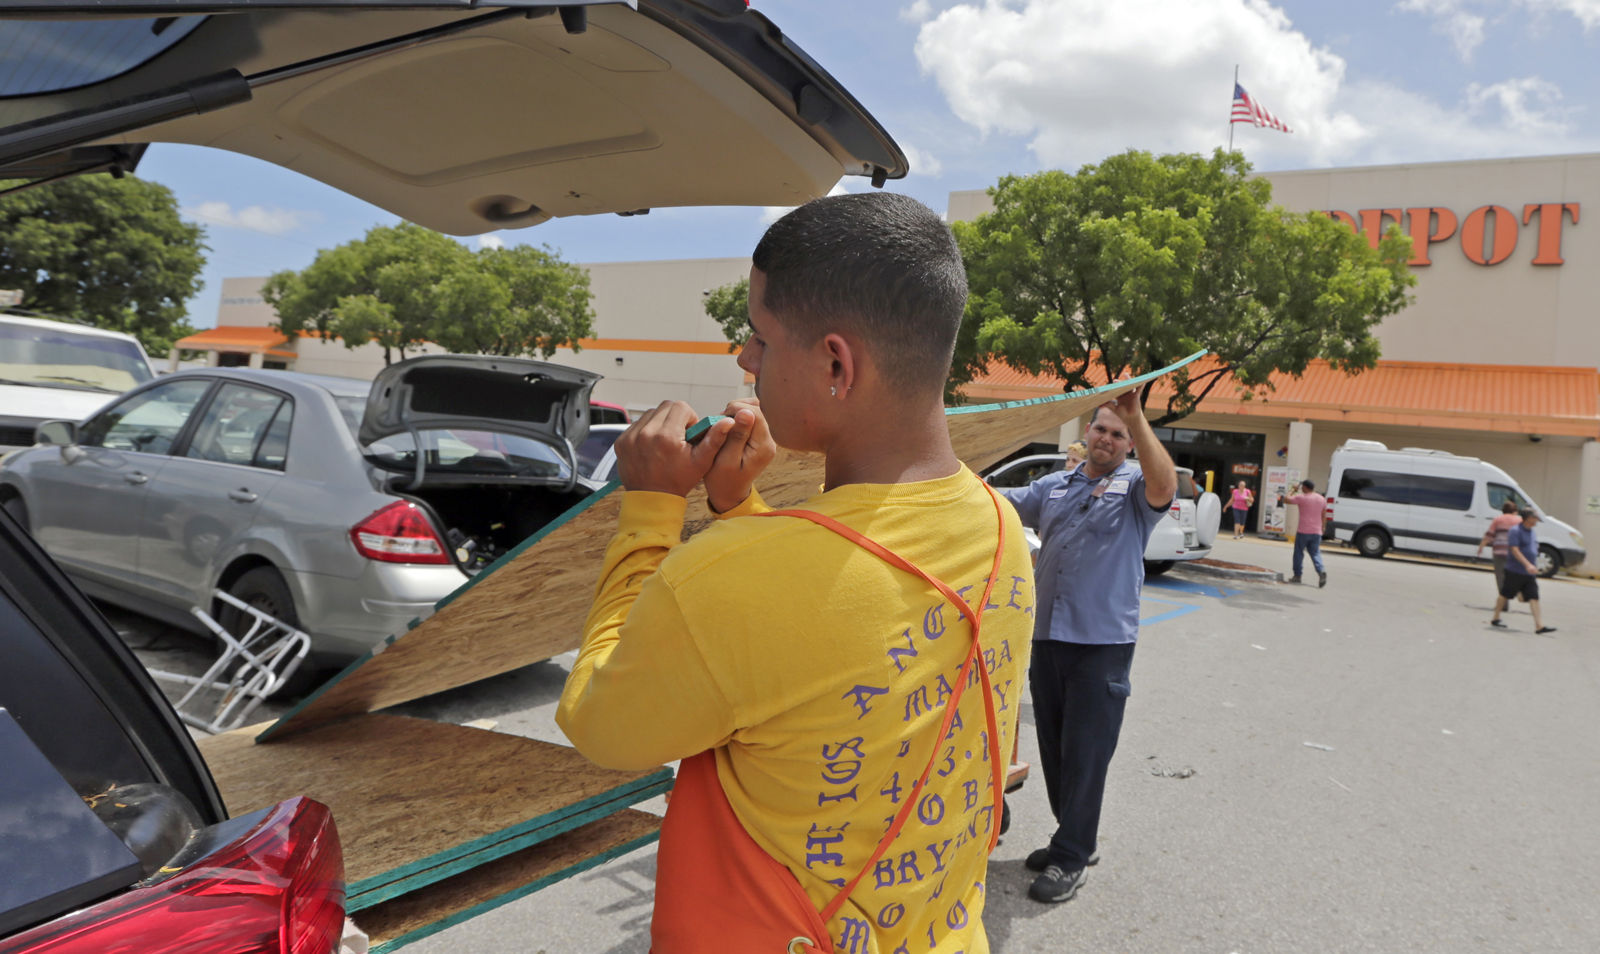 Home Depot employee Fernando Garlobo, left, helps Adrielys Estrada load a sheet of strand board on a van as residents prepare for Hurricane Irma in Hialeah, Fla. Hurricane Irma grew into a dangerous Category 5 storm, the most powerful seen in the Atlantic in over a decade, and roared toward islands in the northeast Caribbean Tuesday on a path that could eventually take it to the United States. (AP Photo/Alan Diaz)